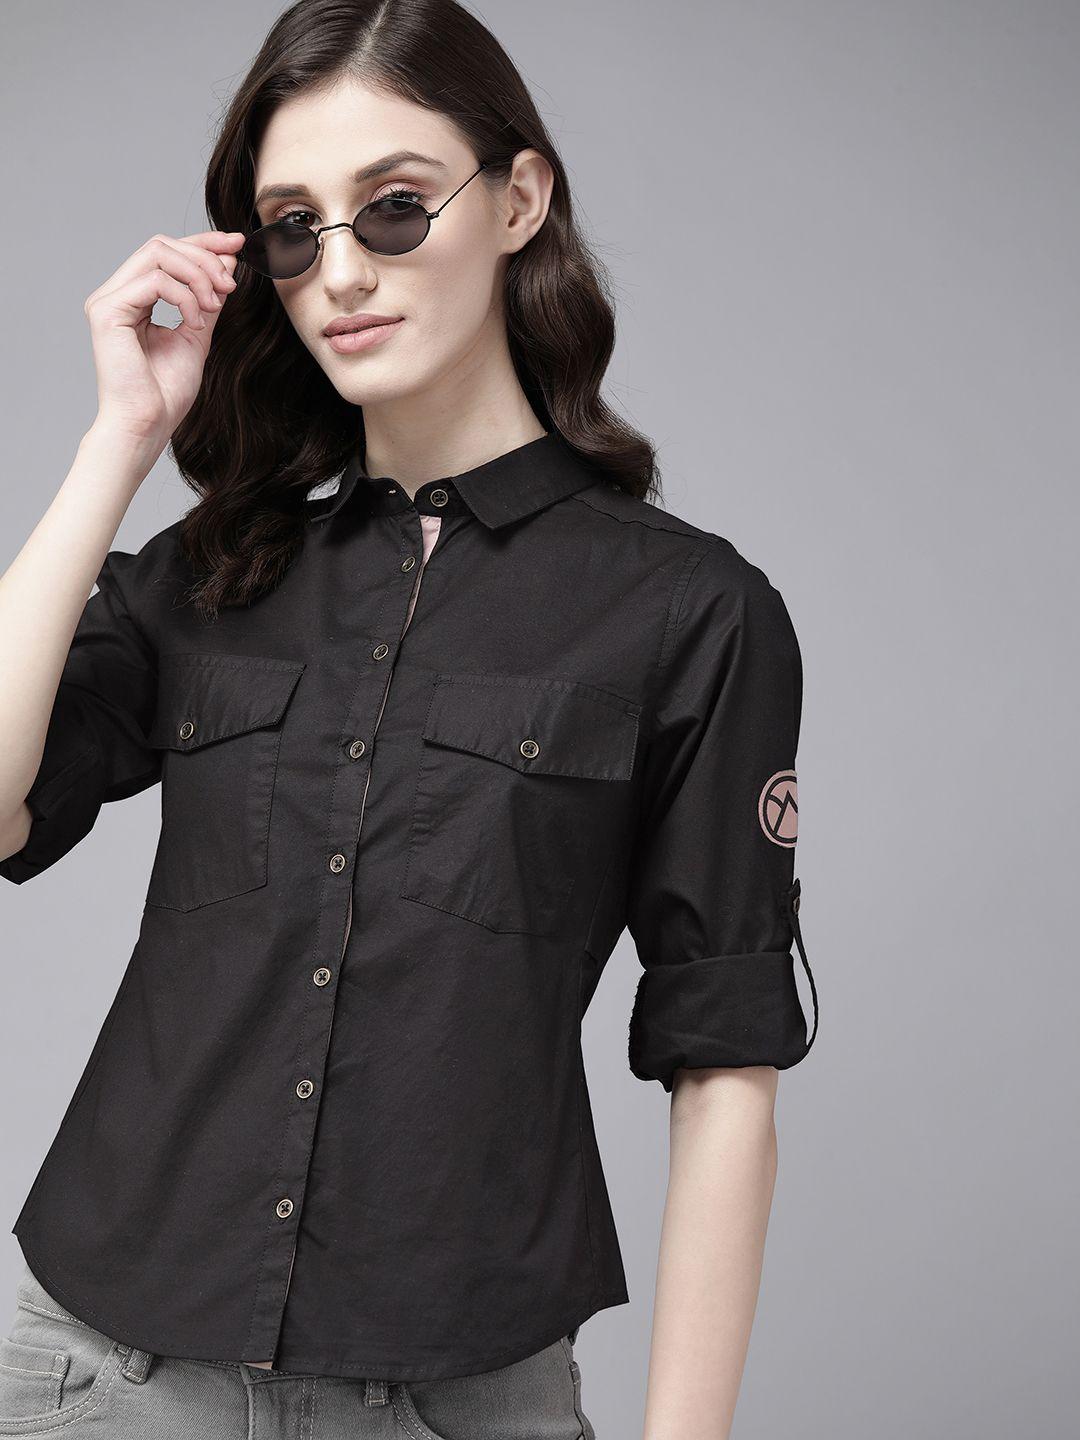 the roadster lifestyle co. women black solid stretchable casual shirt